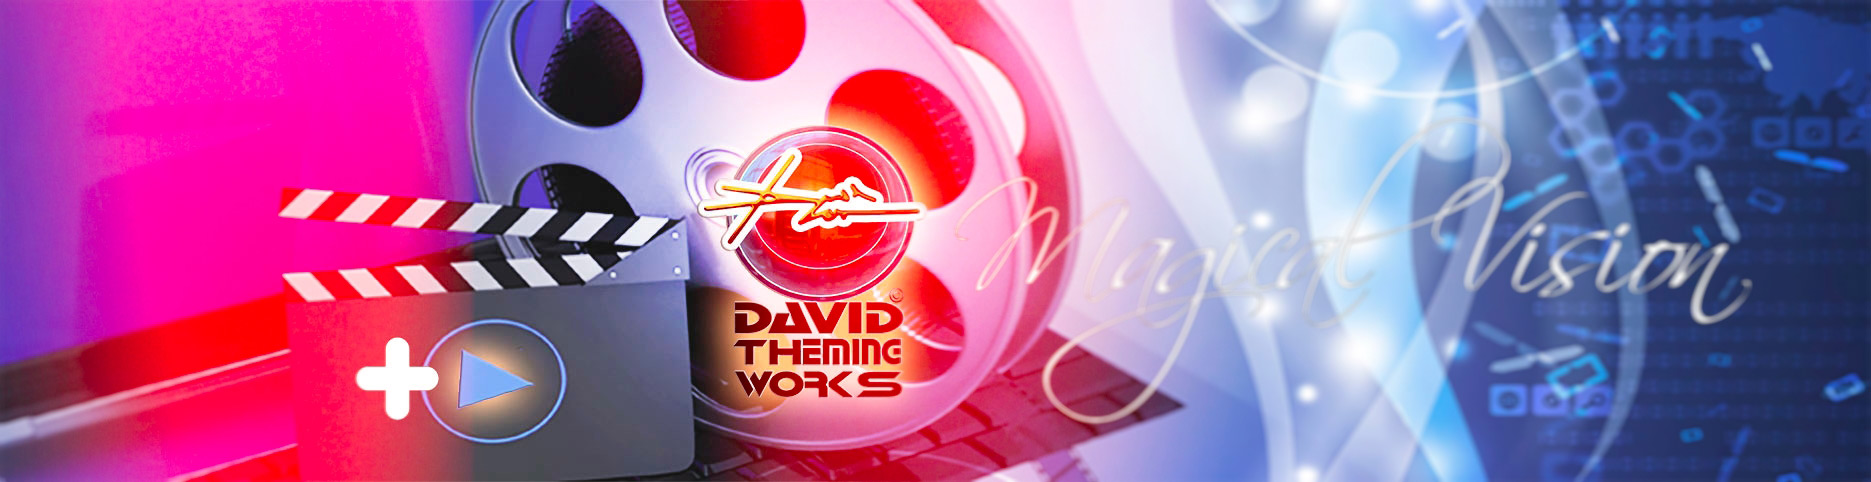 david theming works youtube canal